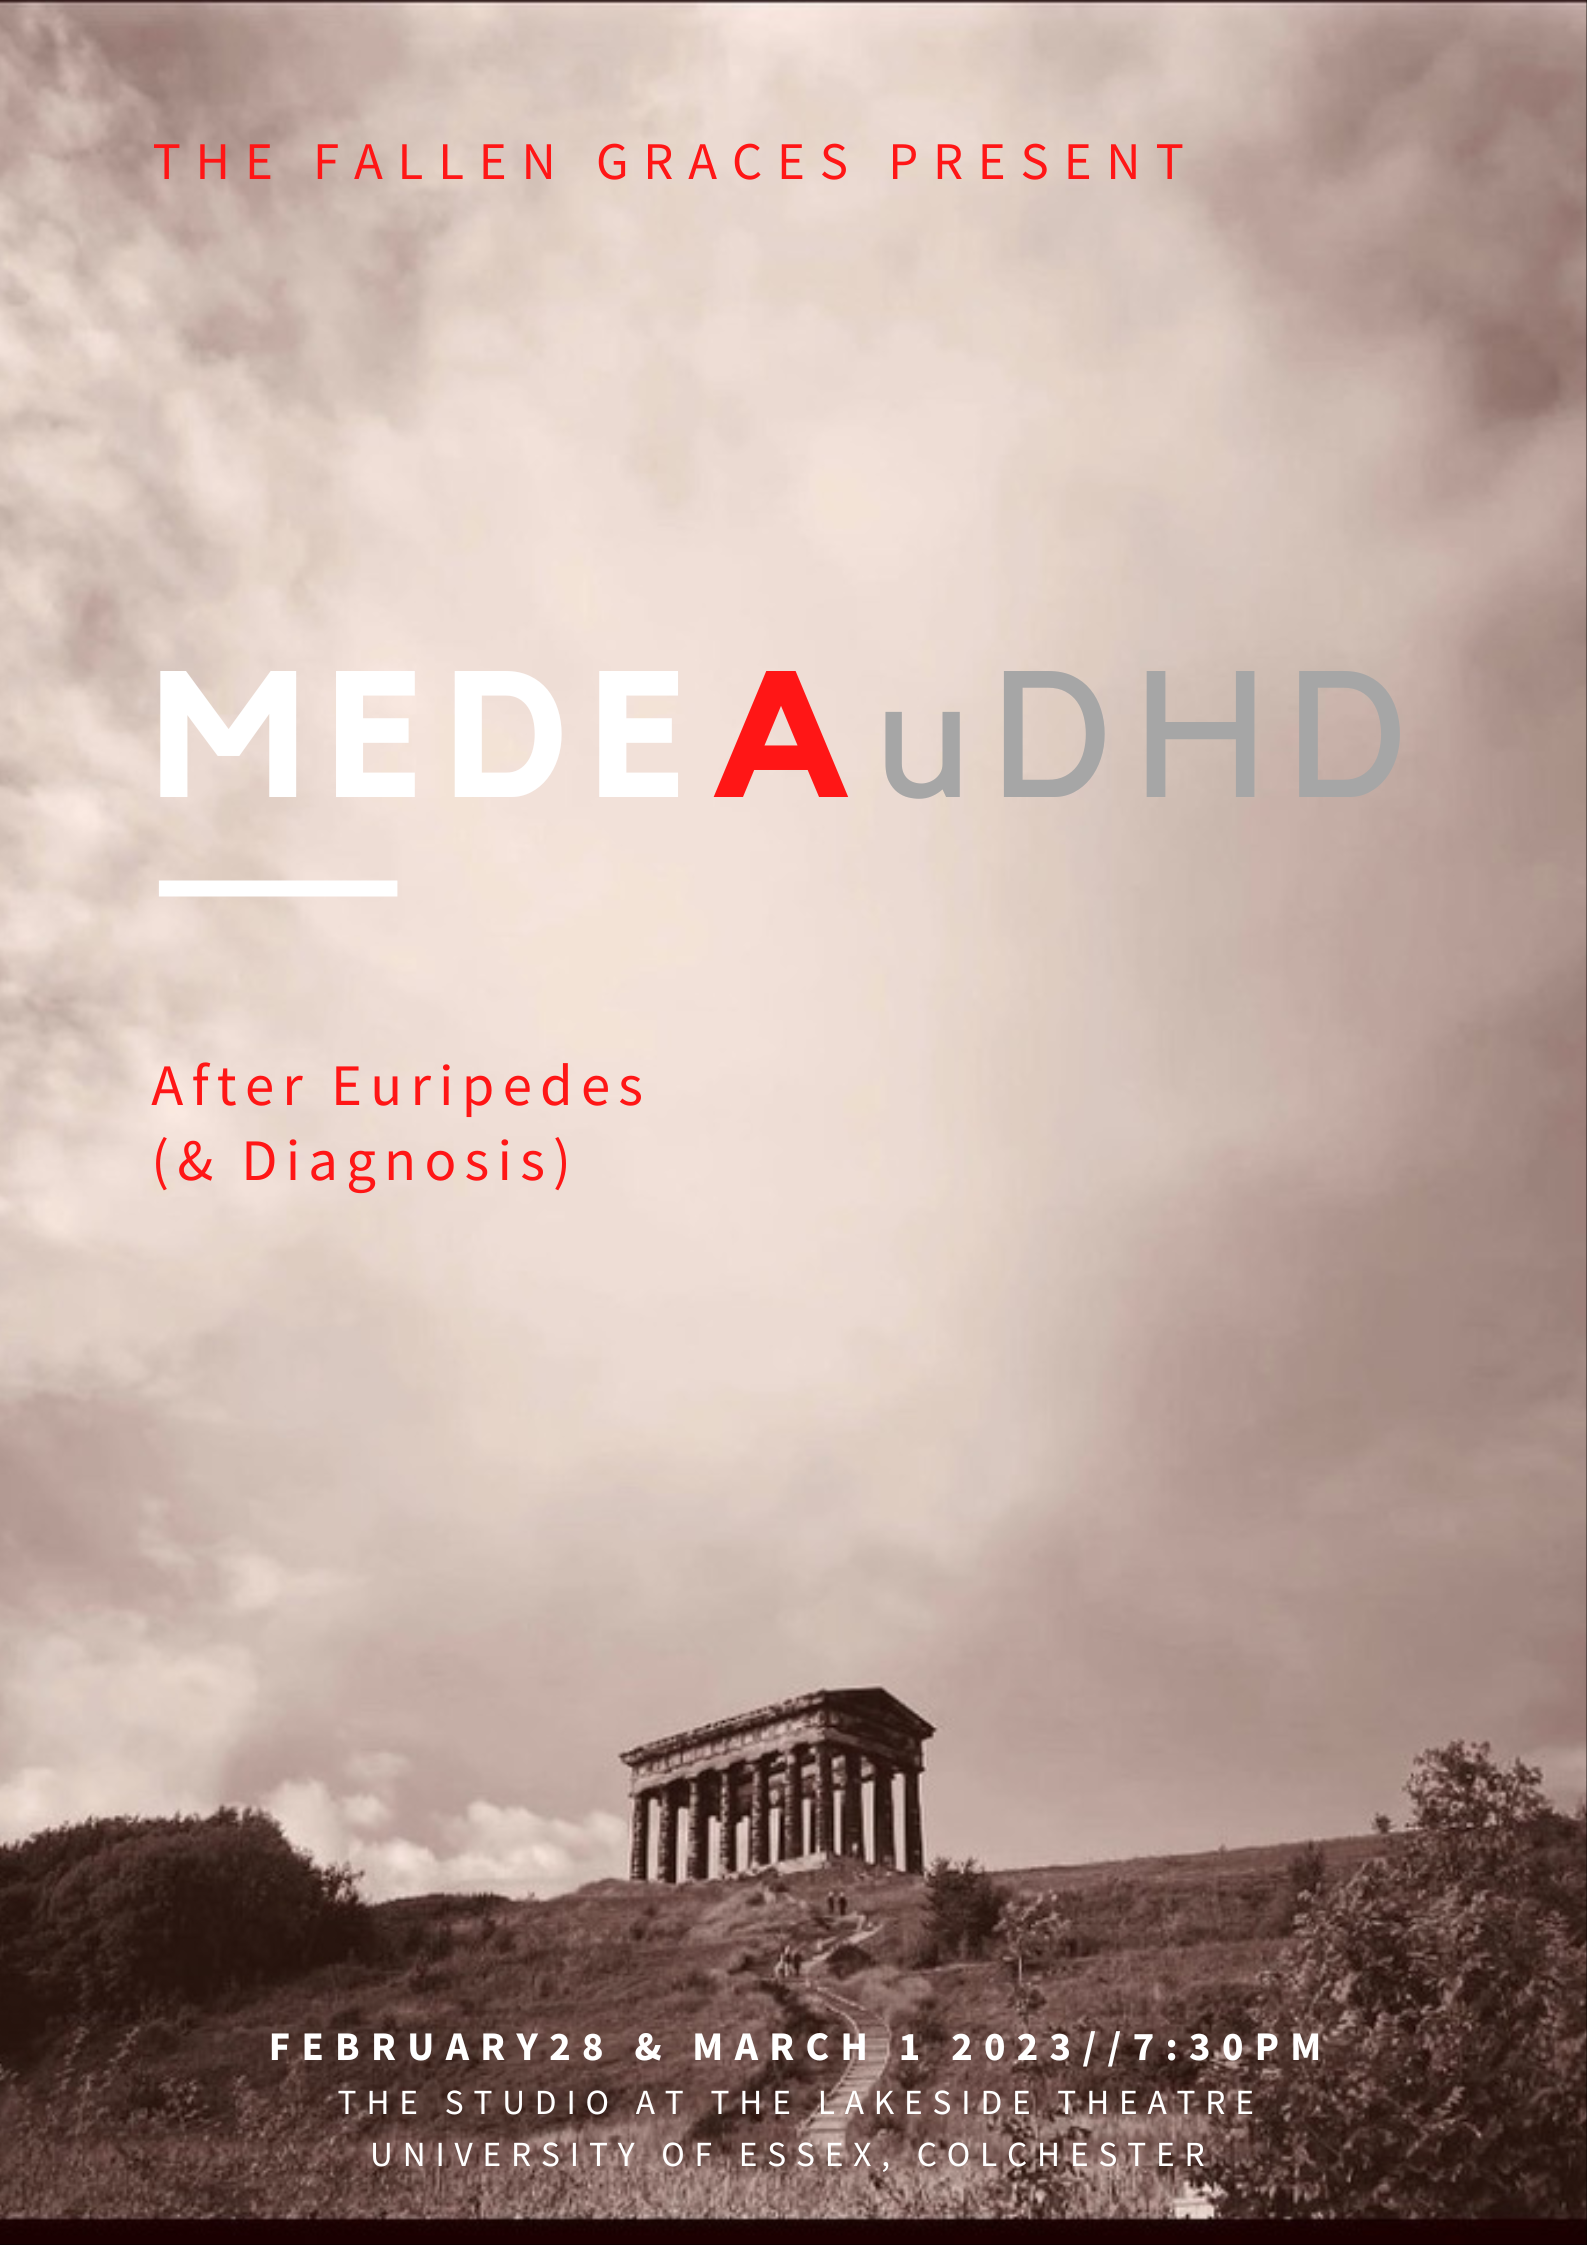 Sepia image of a greek building on top of a hill with writing of MedeauDHD